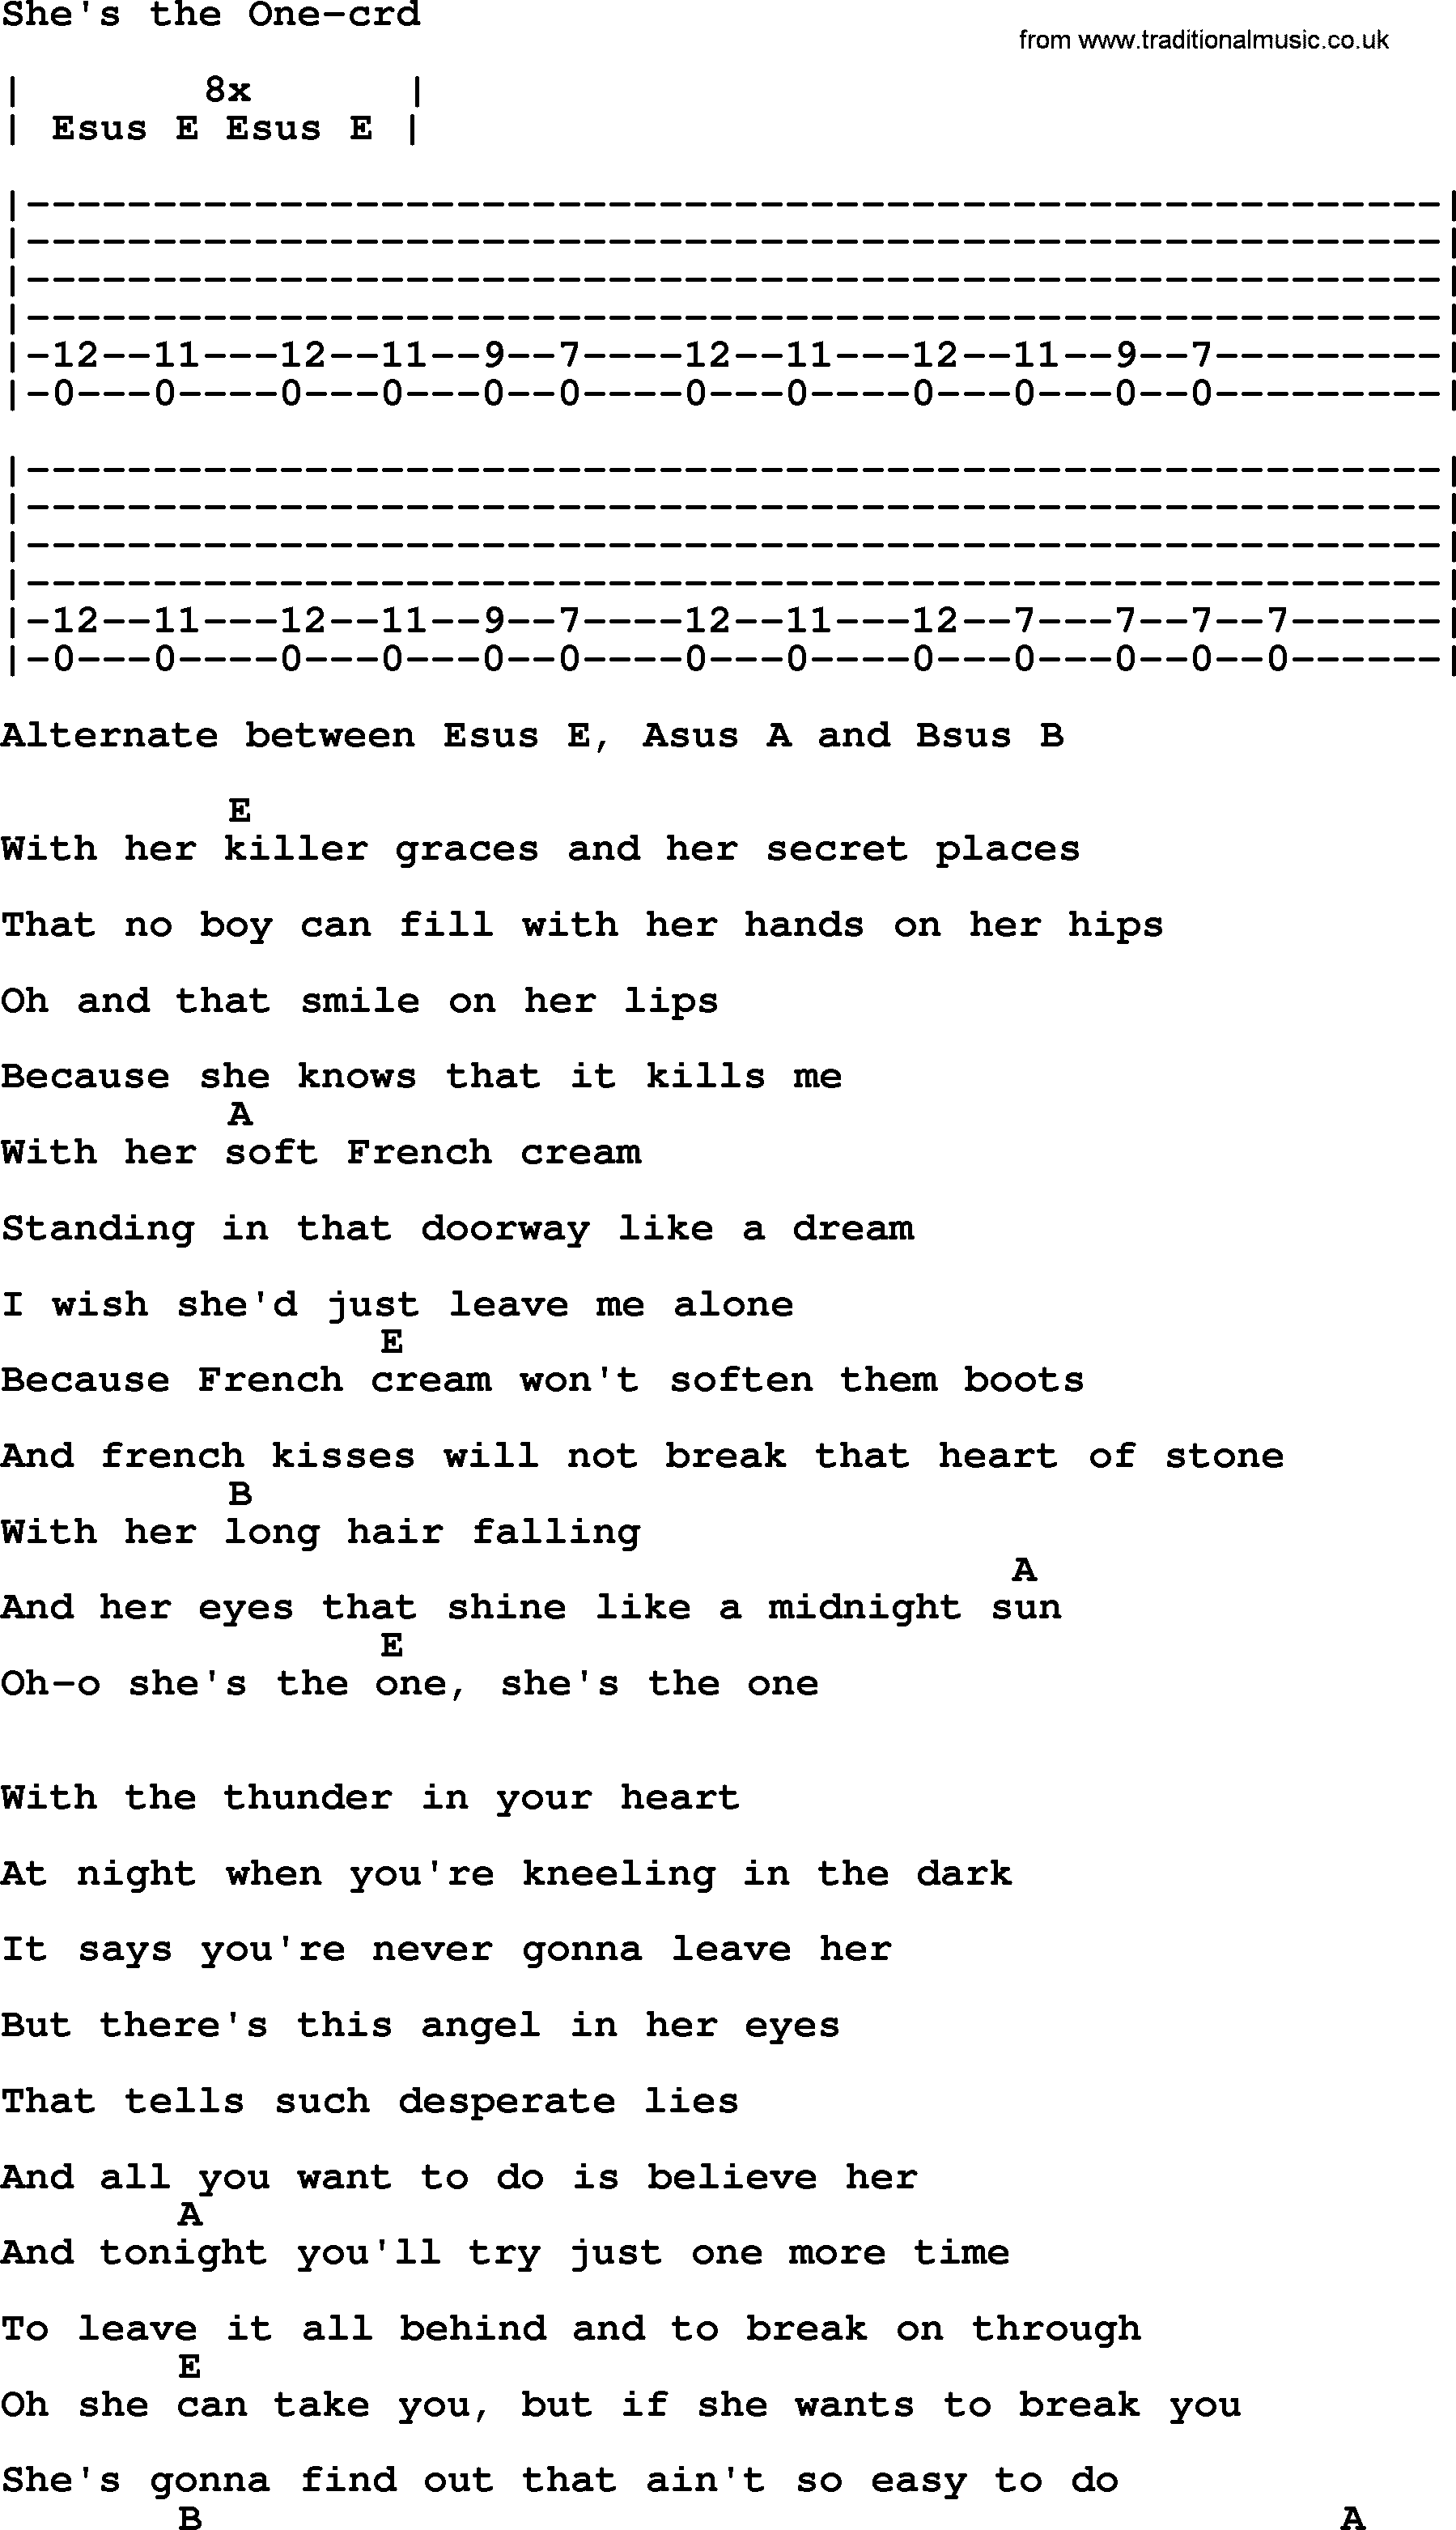 Bruce Springsteen song: She's The One, lyrics and chords